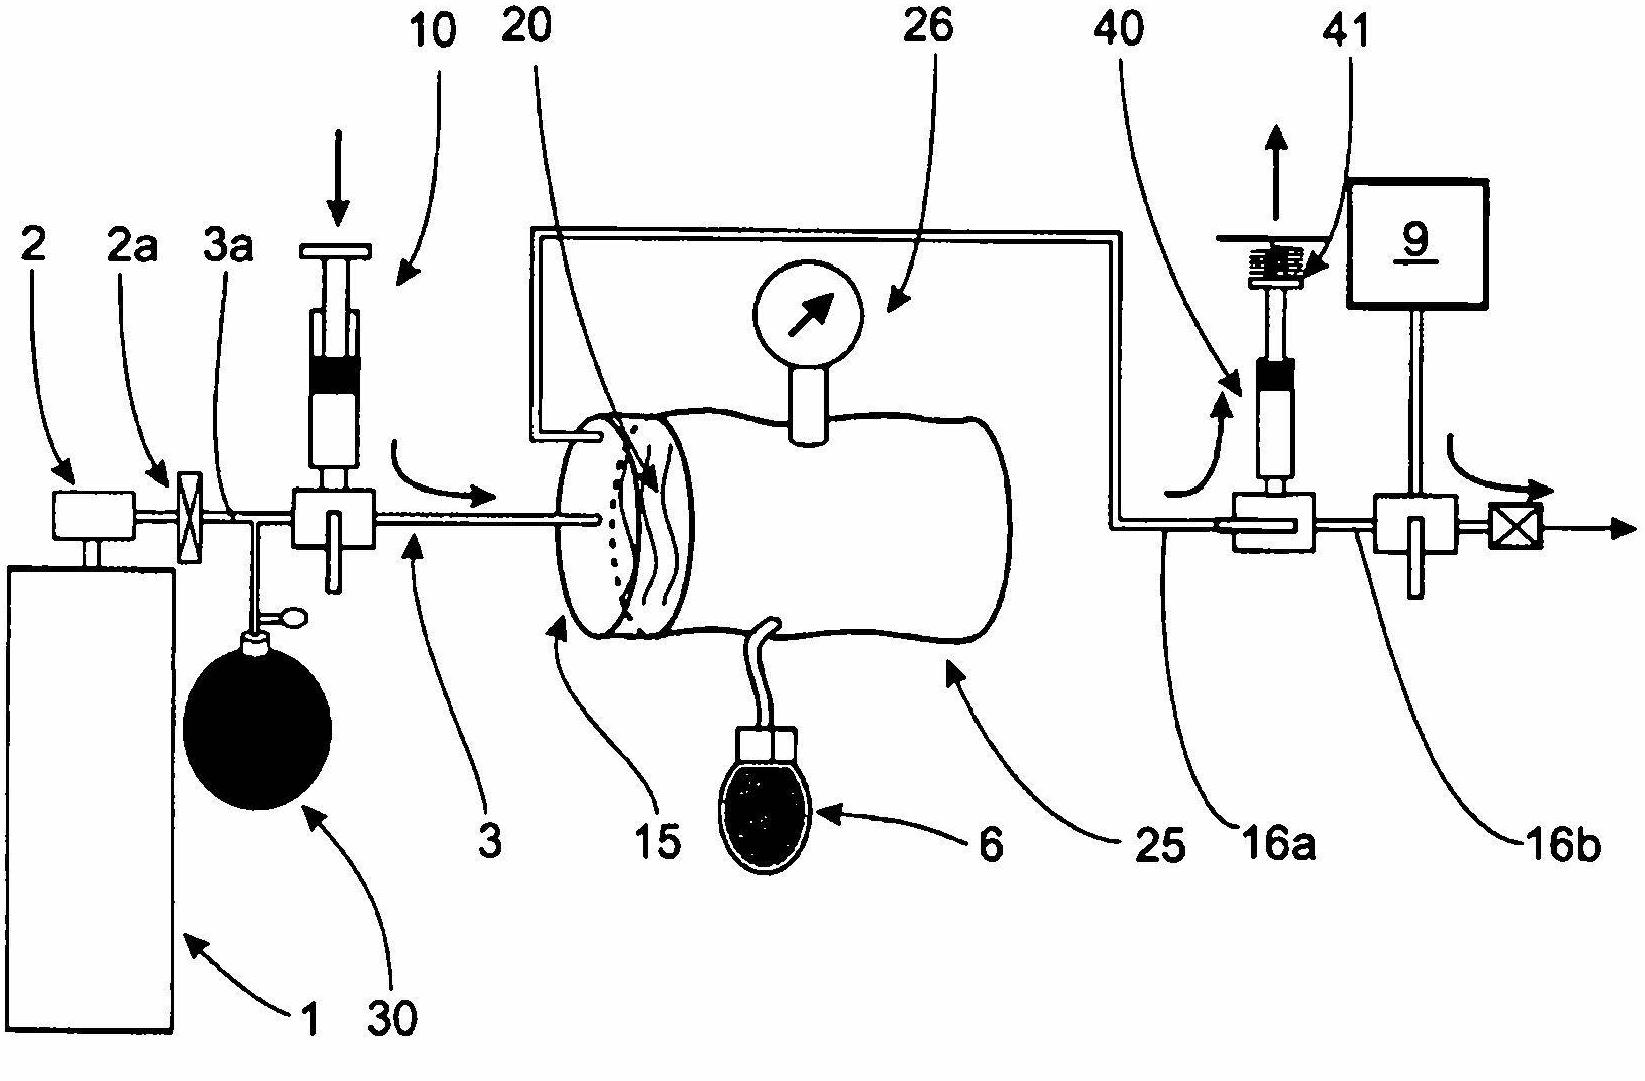 Device for dosing and adjusting the flow of a radiopaque agent to be used in performing an angiography